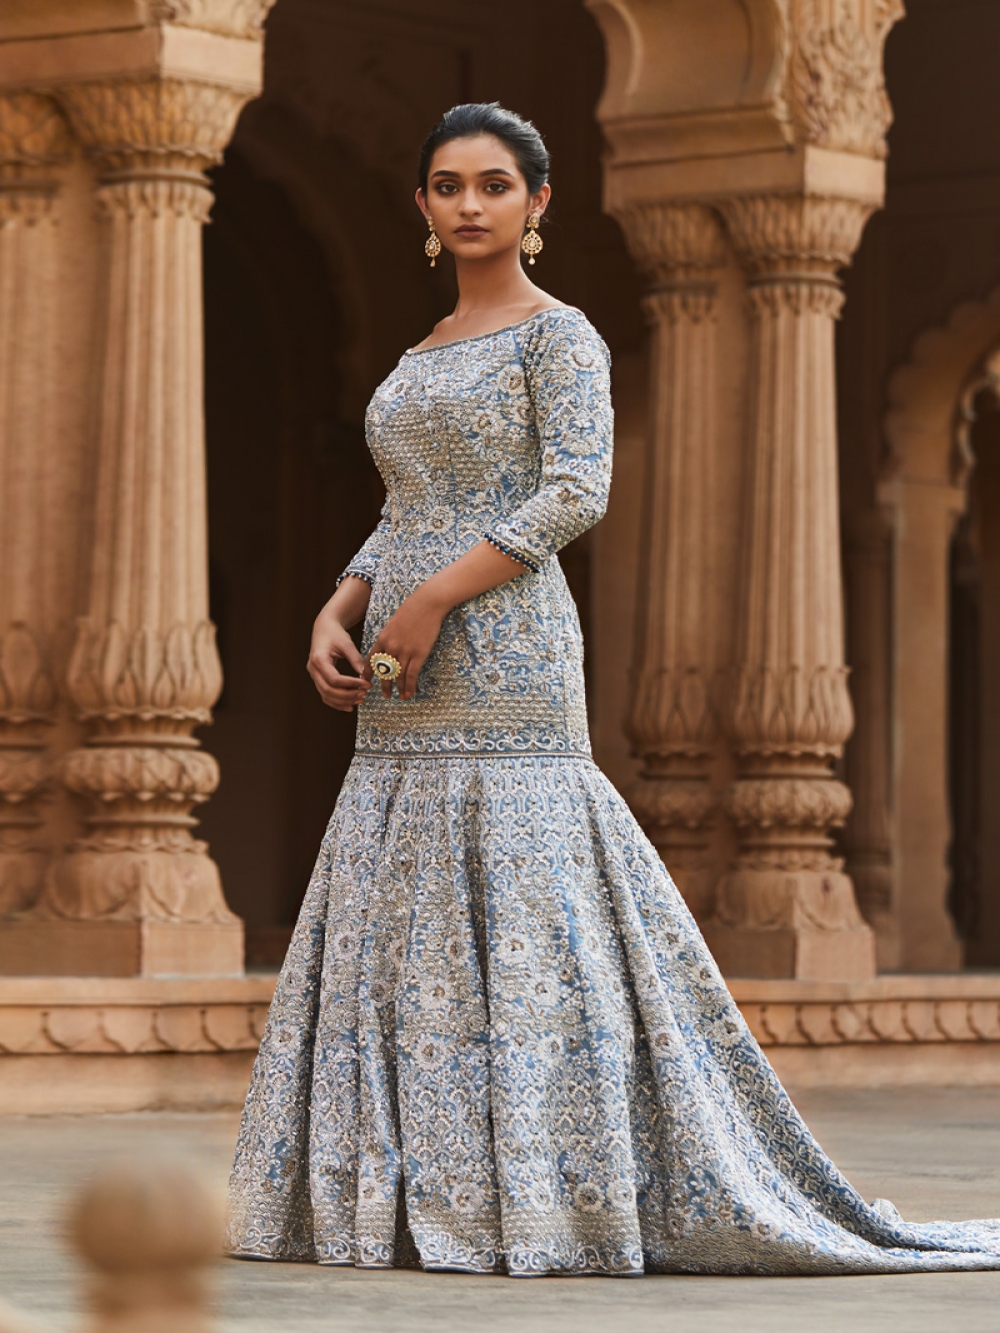 Inspired by 18th-century French rococo art, luxury handloom clothing label,  Tilfi Banaras, rolls out